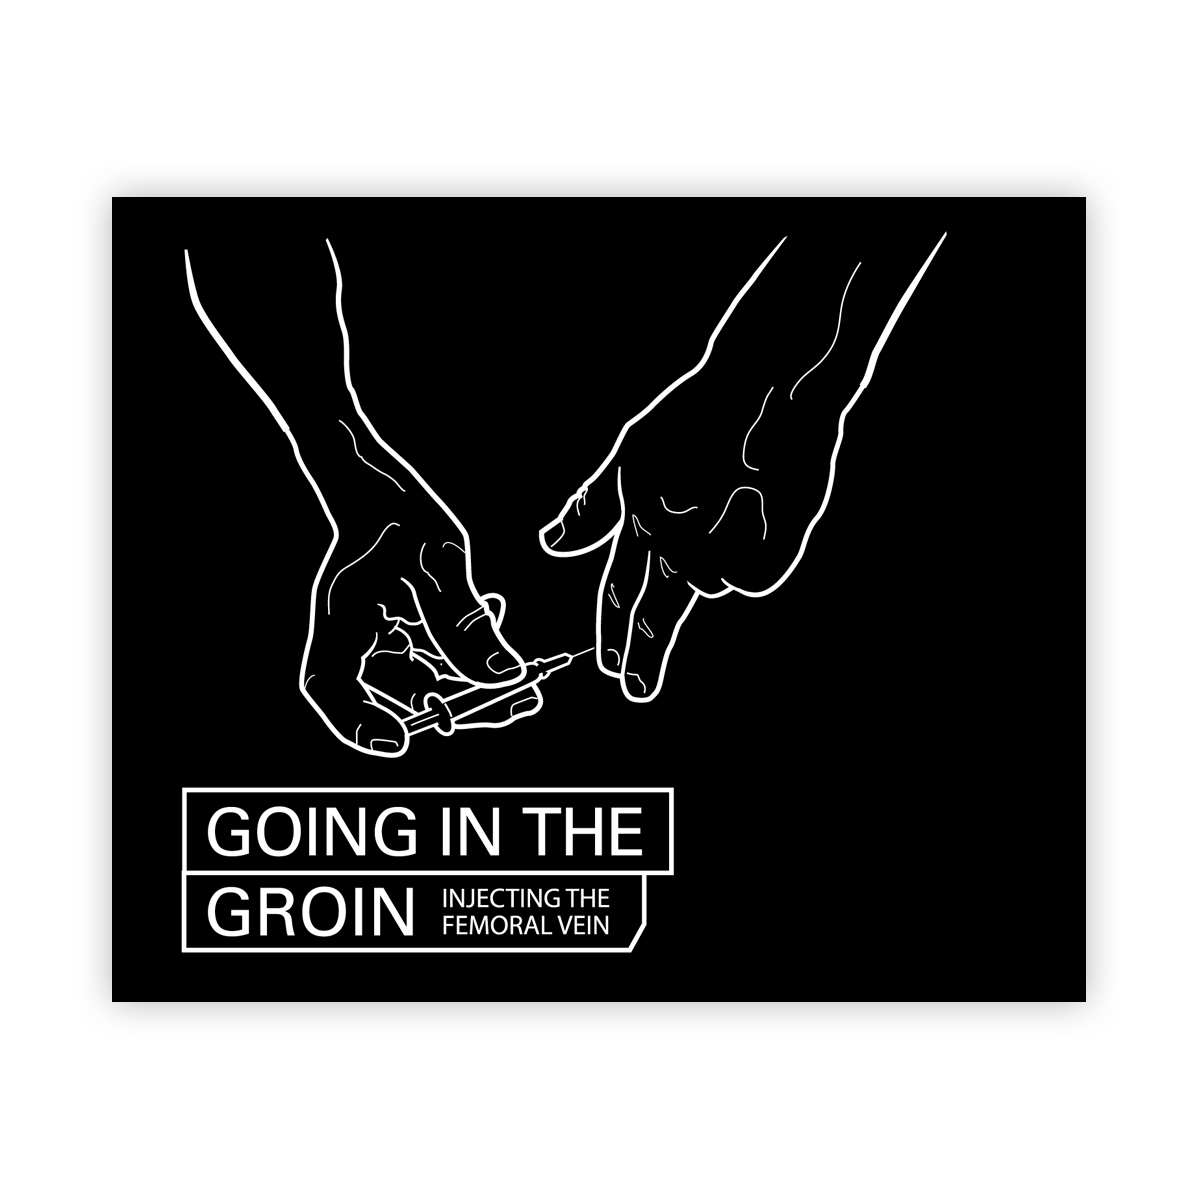 Going in the groin (new edition coming soon)